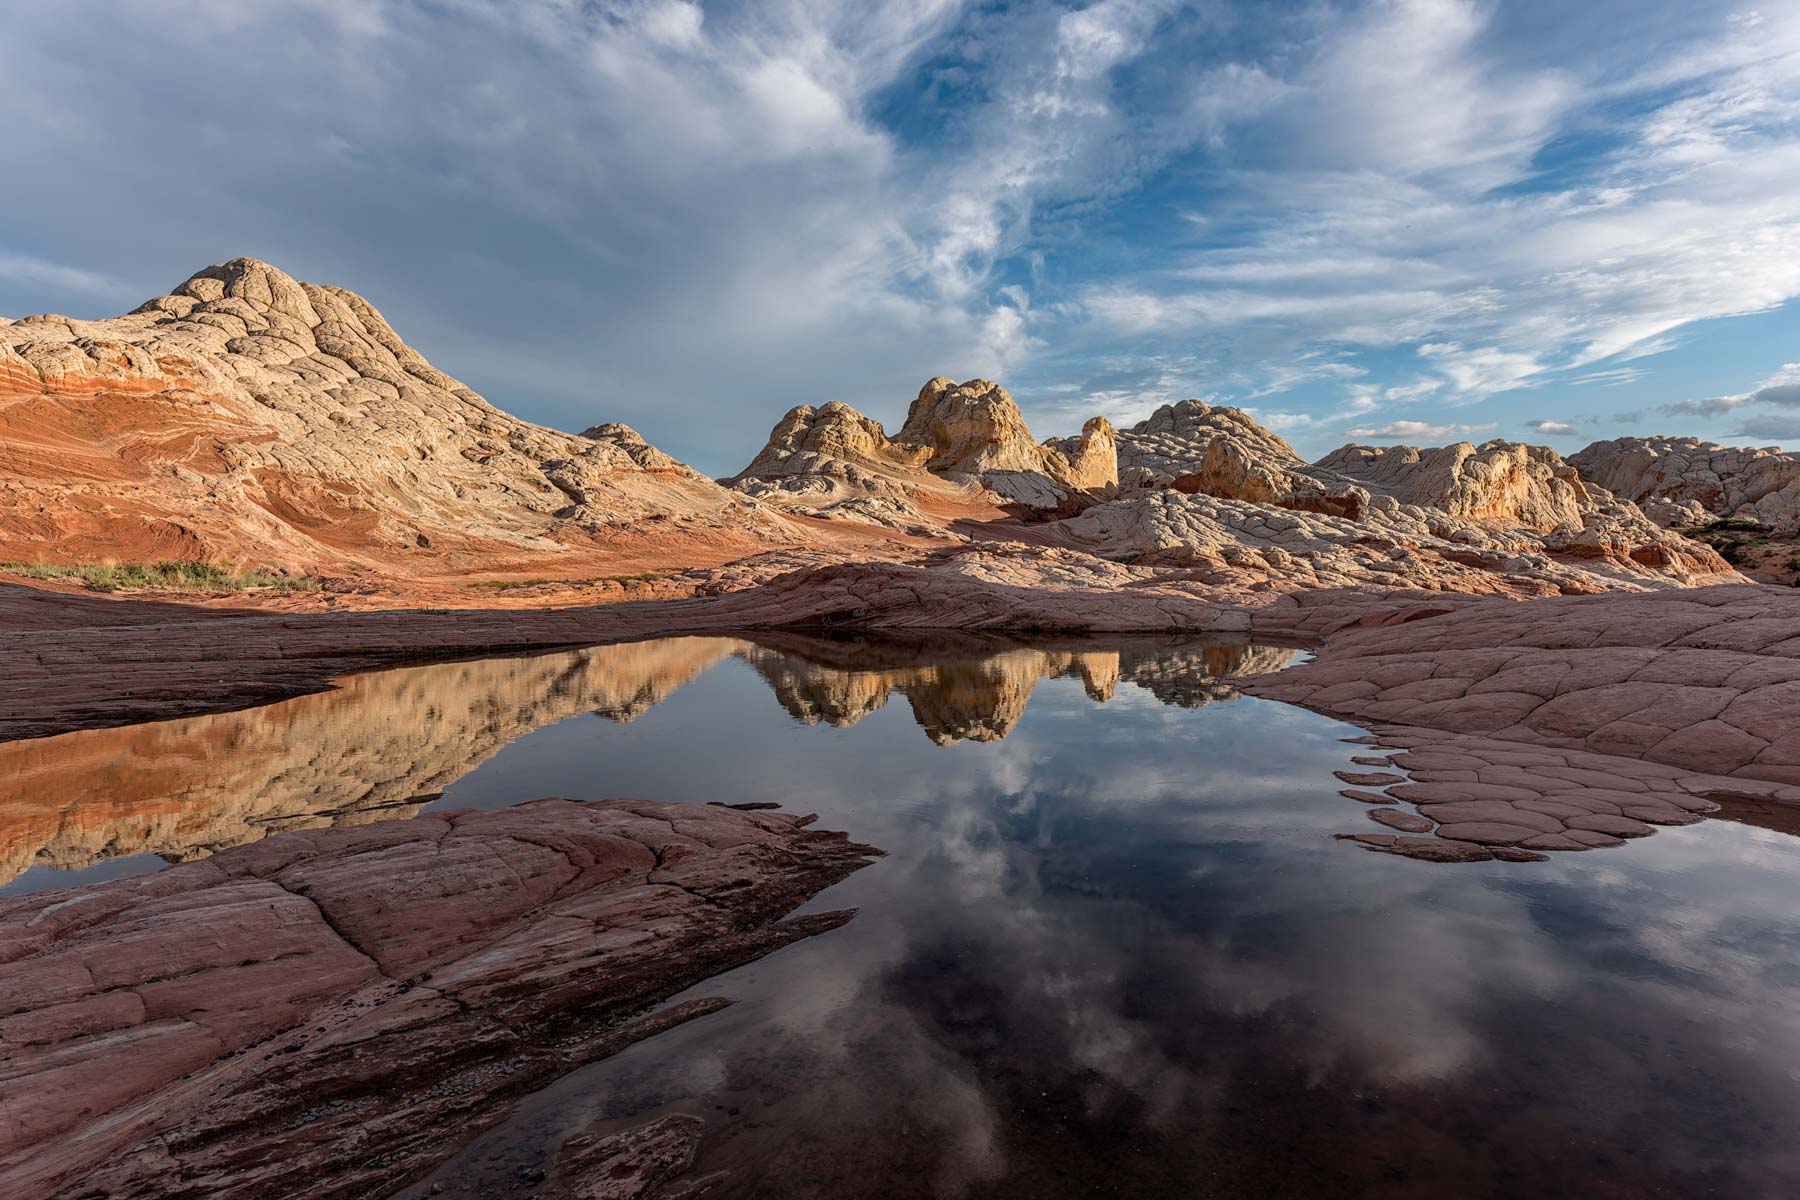 Reflection of The Citadel at The White Pocket in Vermilion Cliffs National Monument